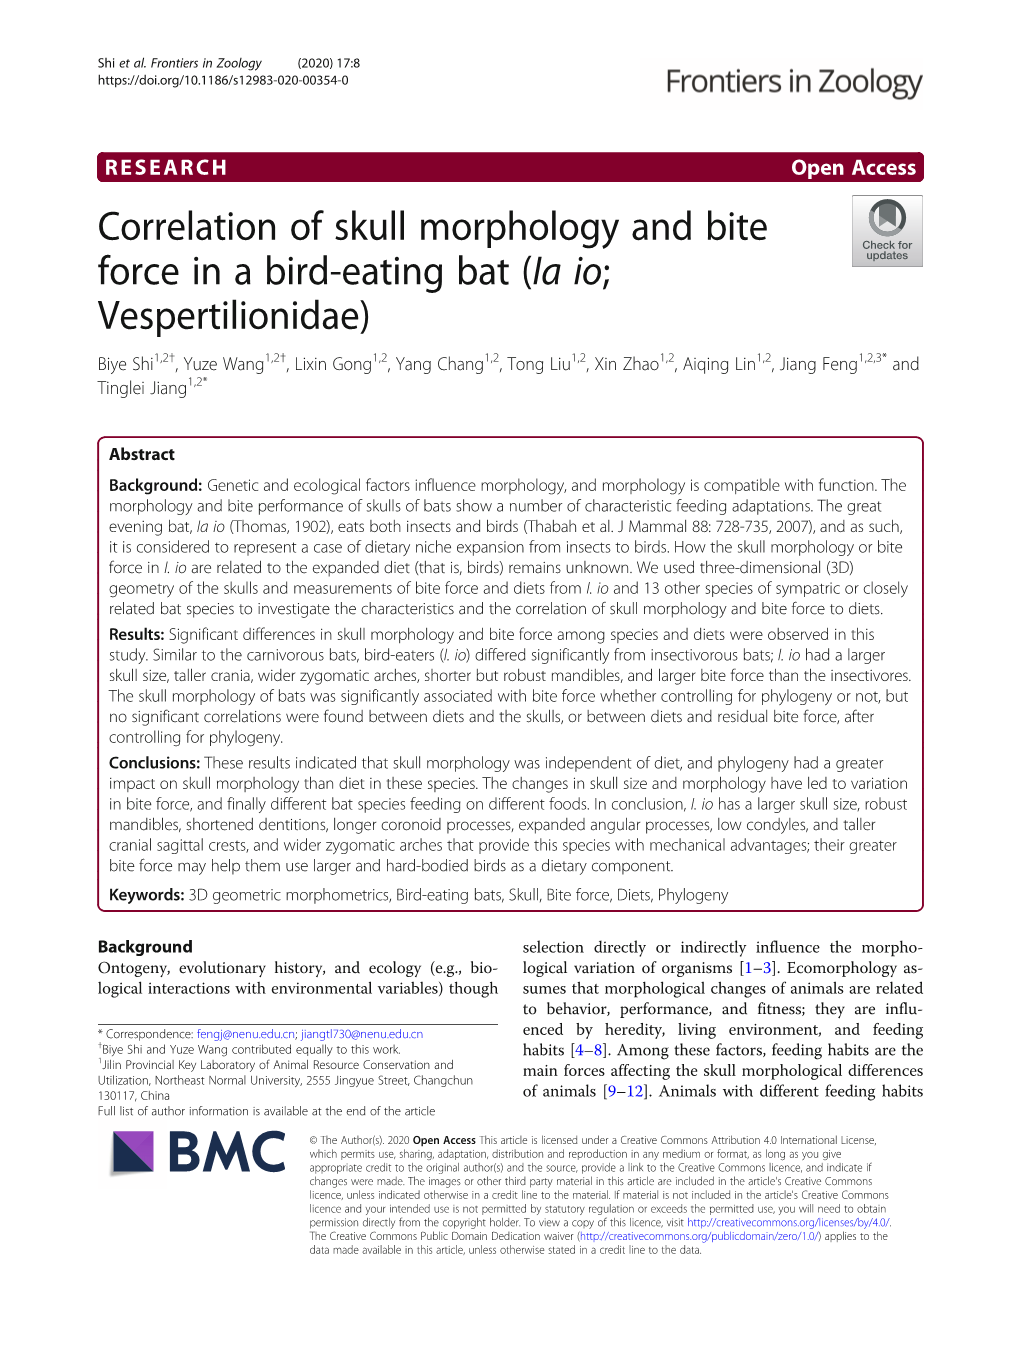 Correlation of Skull Morphology and Bite Force in A